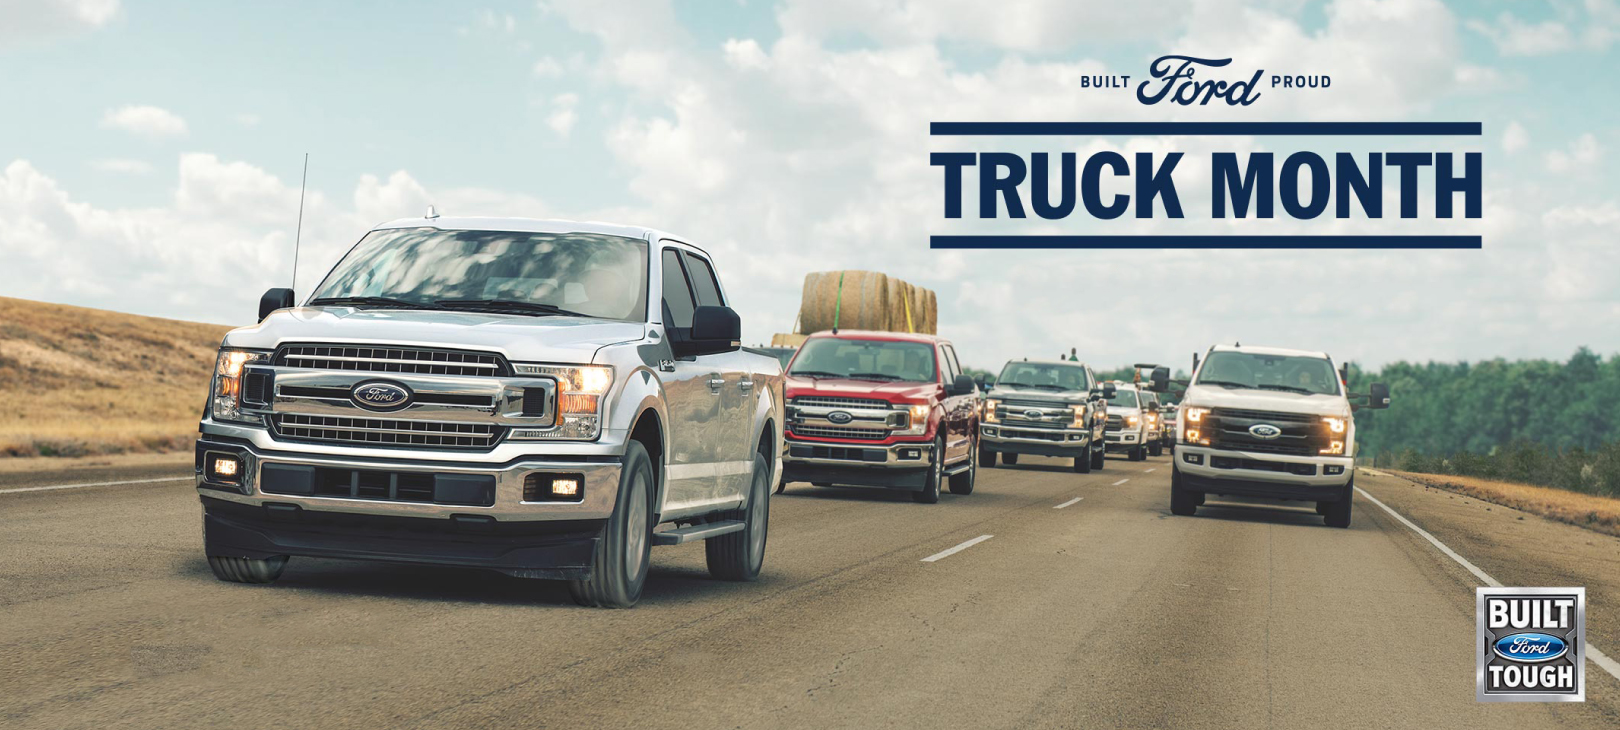 Truck Month is Here! Join the Stampede with the All-New Ford Ranger